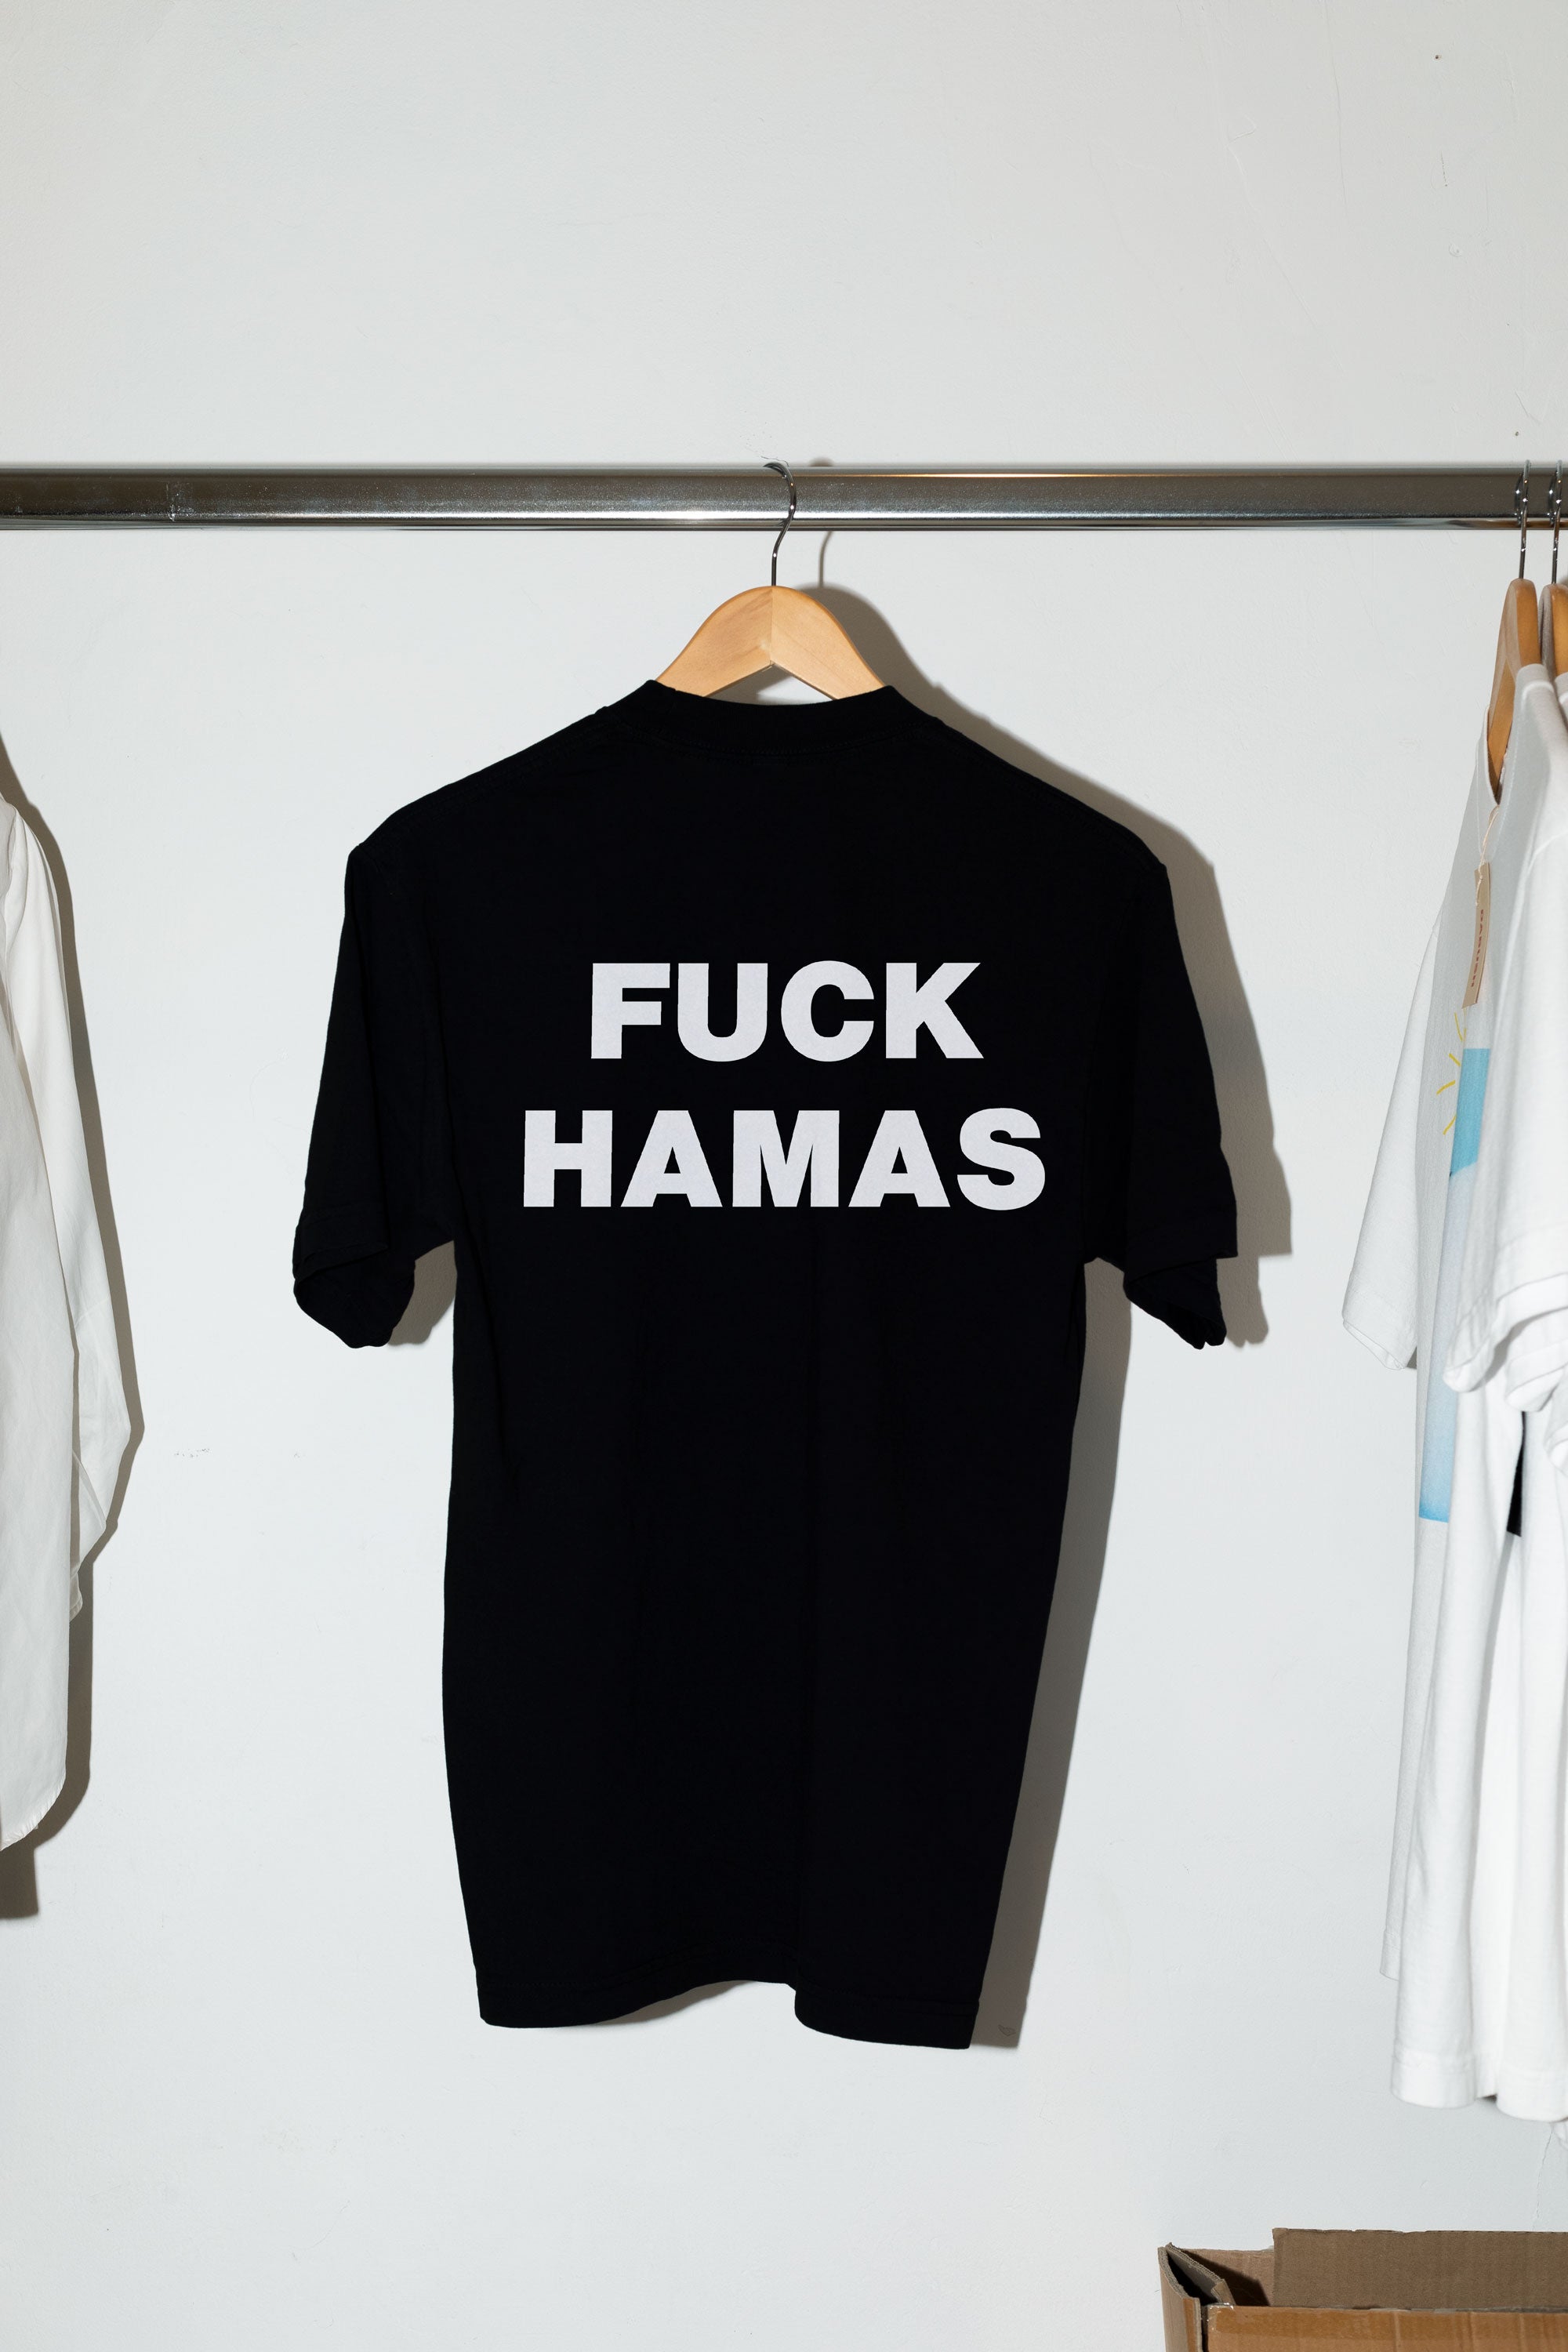 FUCK HAMAS T SHIRT BY DABUSH. DABUSH T-SHIRTS. 100% Cotton, oversized tee with Back and front print. Made in Tel aviv. Shop and view the latest Drops from the official DABUSH website. Worldwide Shipping. DABUSH is a publishing house, design studio and a brand based in Tel Aviv, Israel.